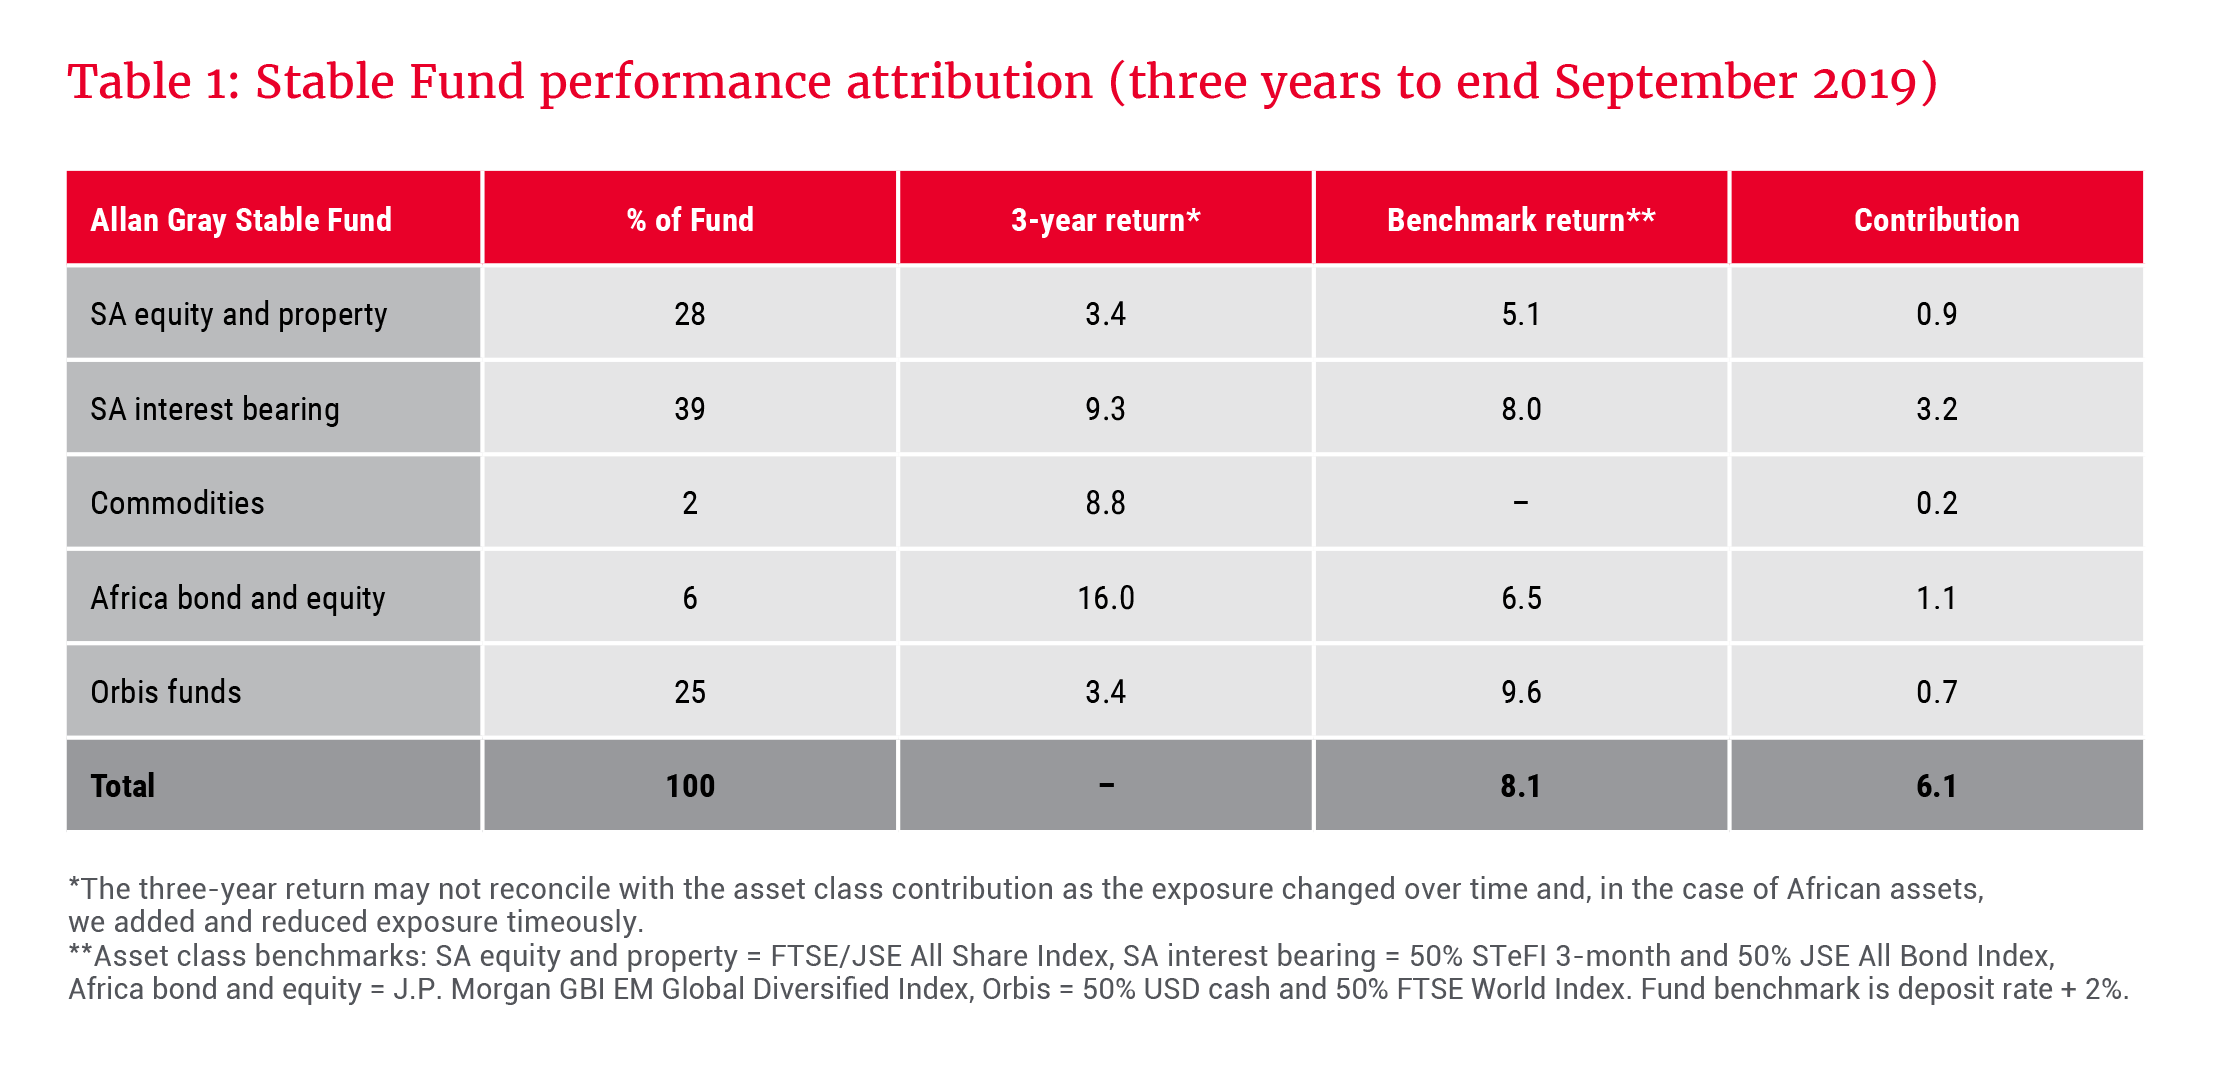 Allan Gray Stable Fund performance attribution (three years to end September 2019)